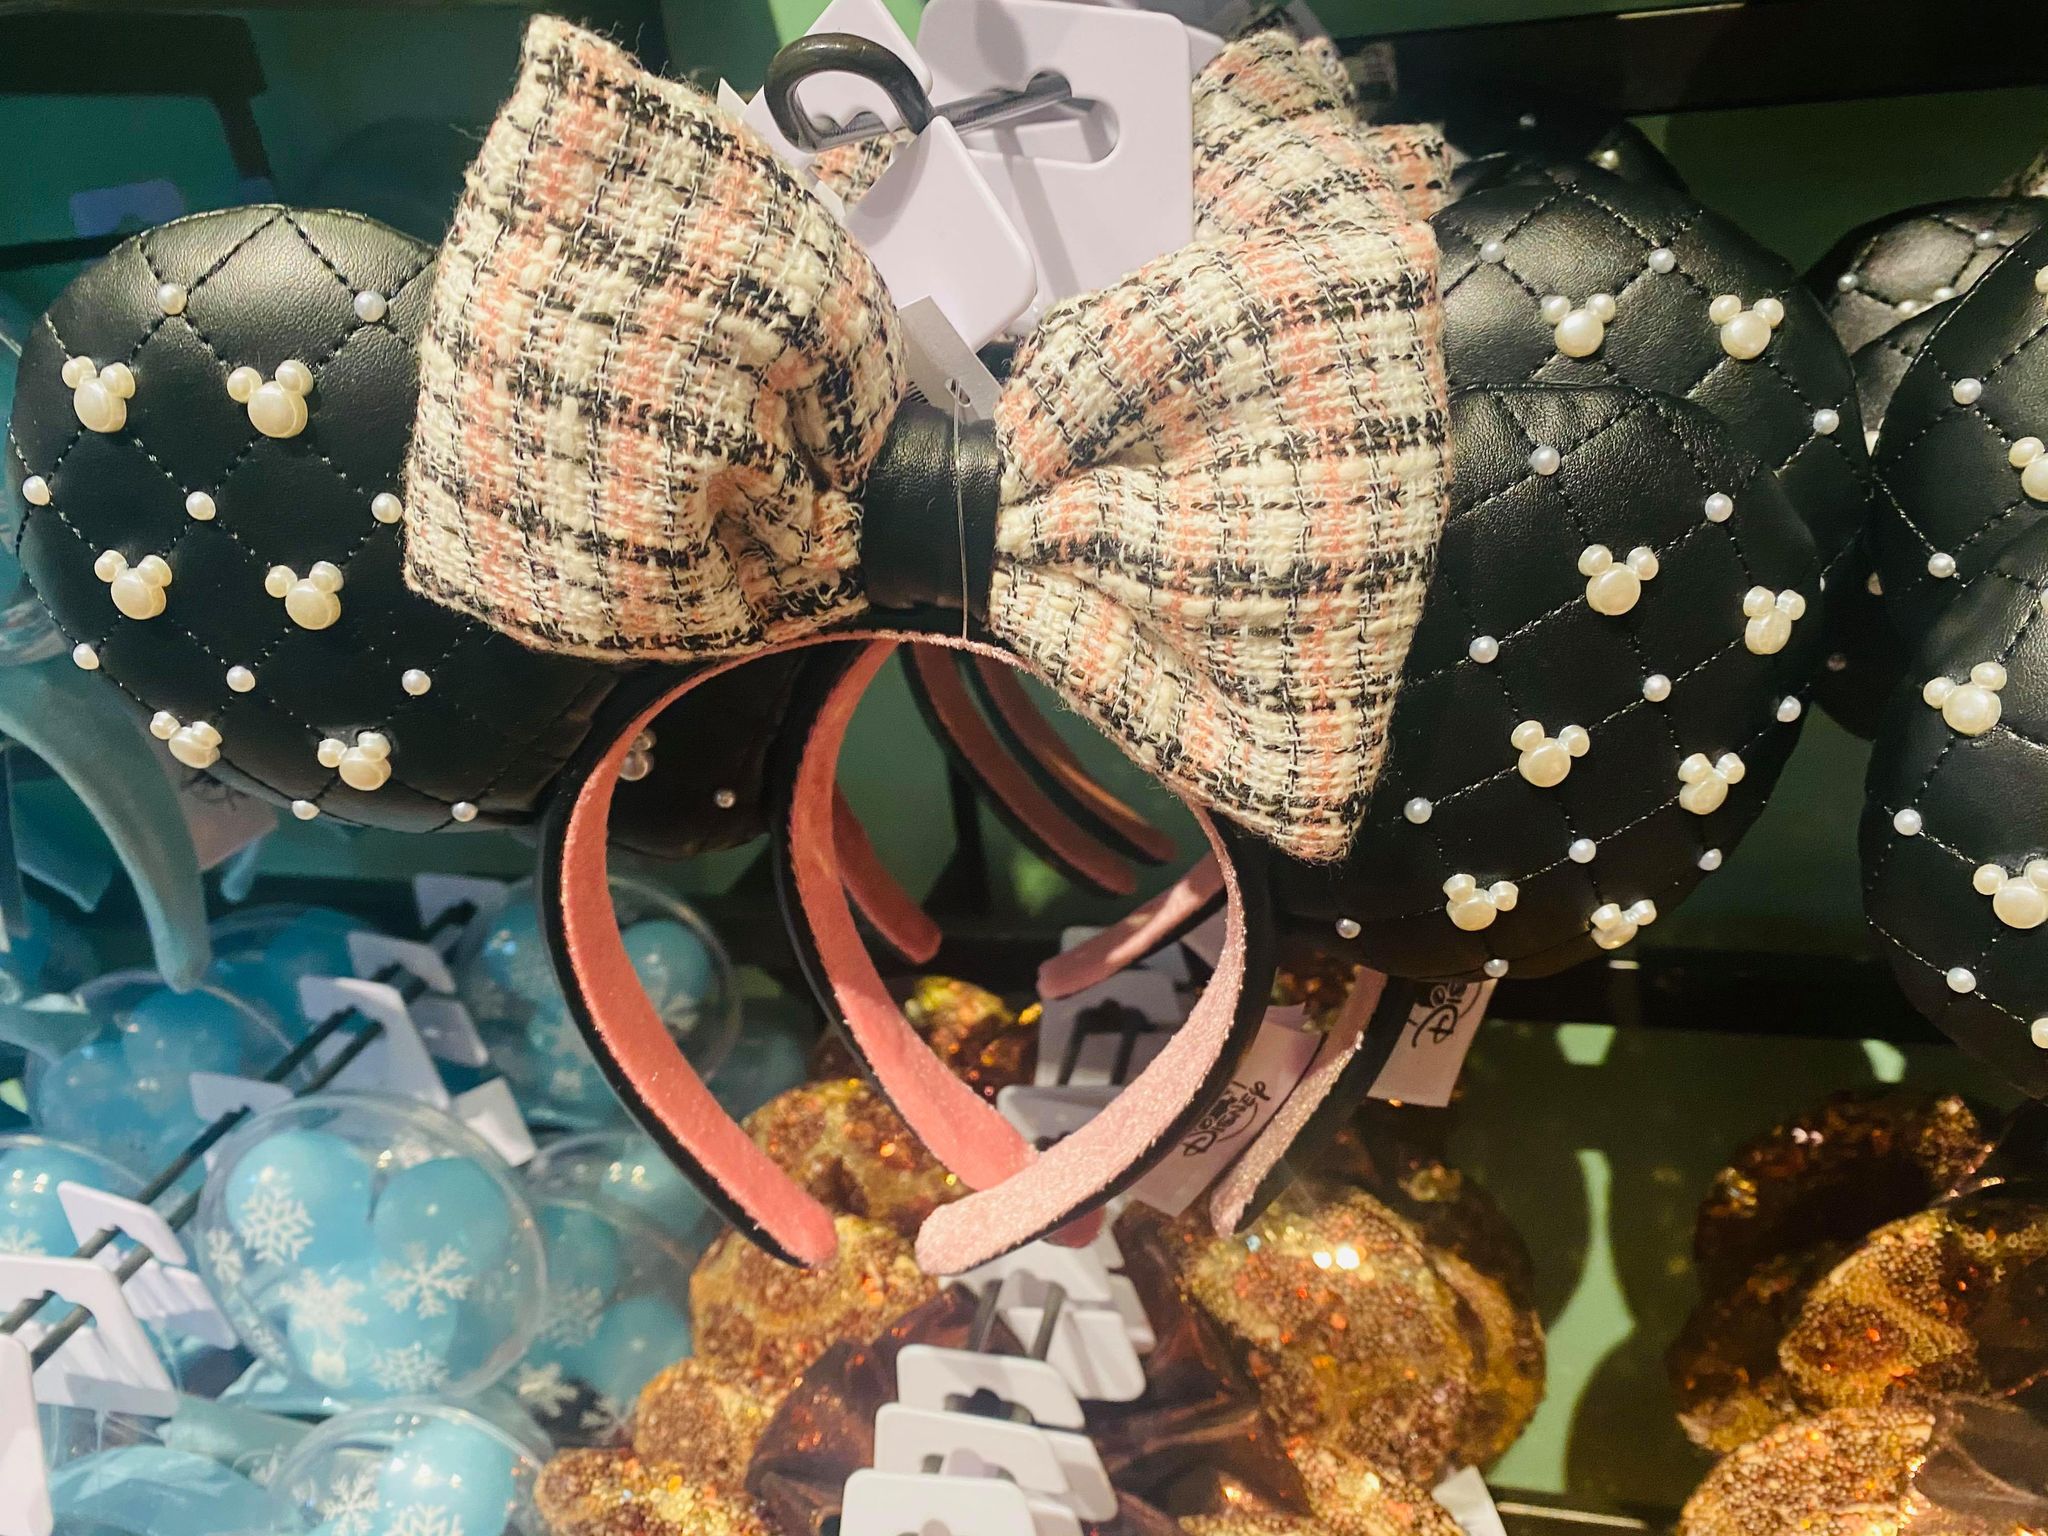 Disney, Other, Gorgeous Tweed And Pearl Minnie Mouse Ears